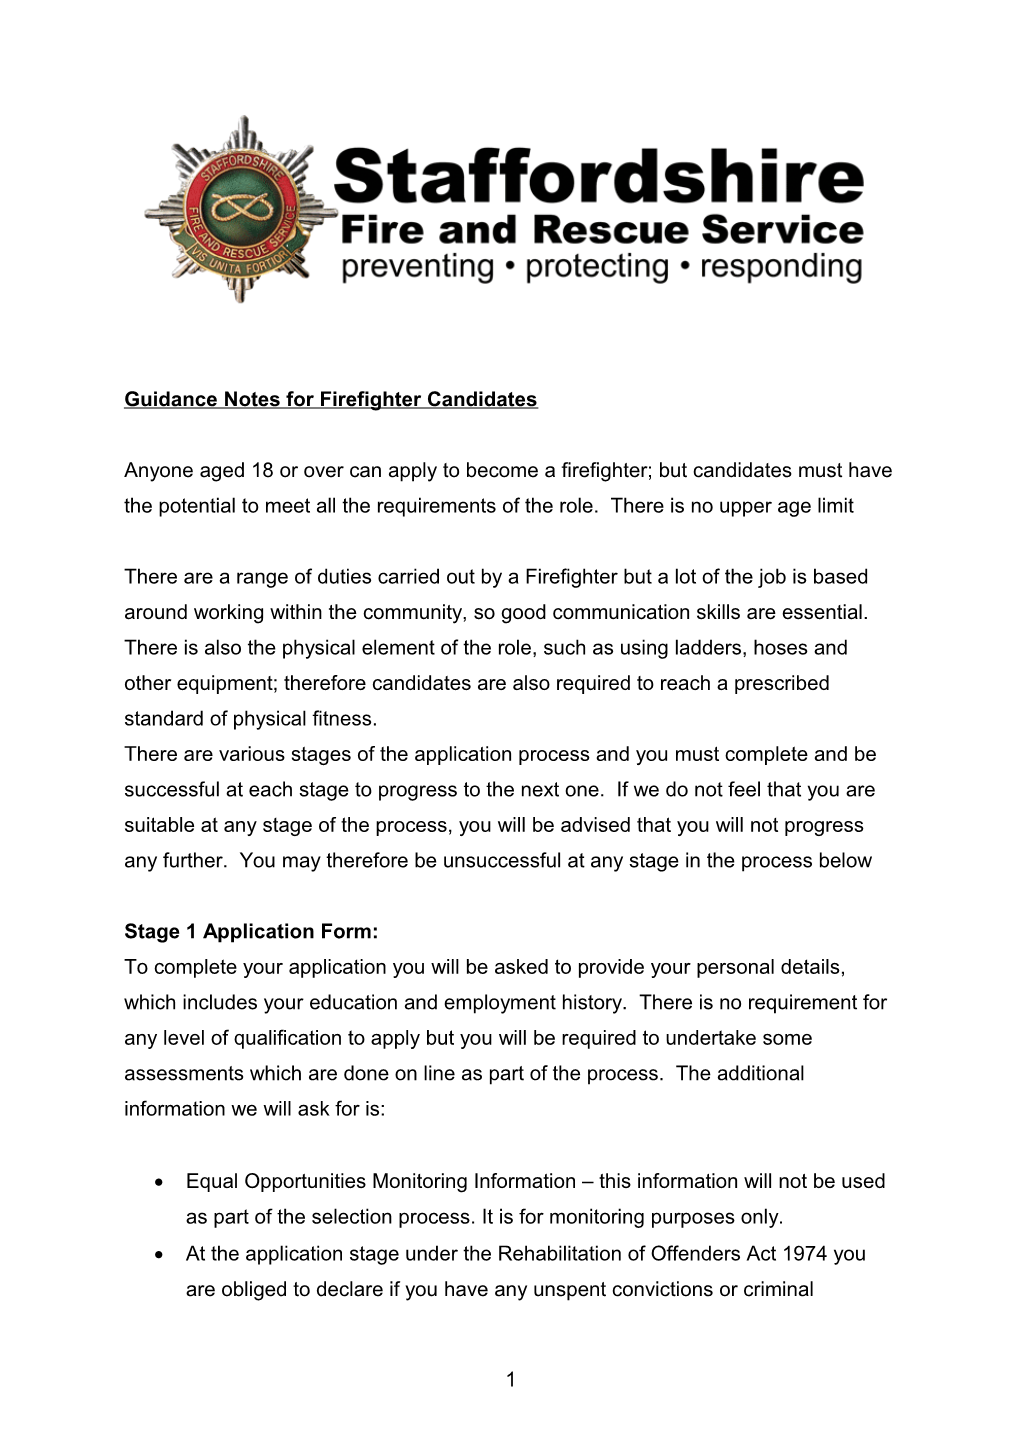 Anyone Over 18 Can Apply to Become a Firefighter, However We Are Looking for People With